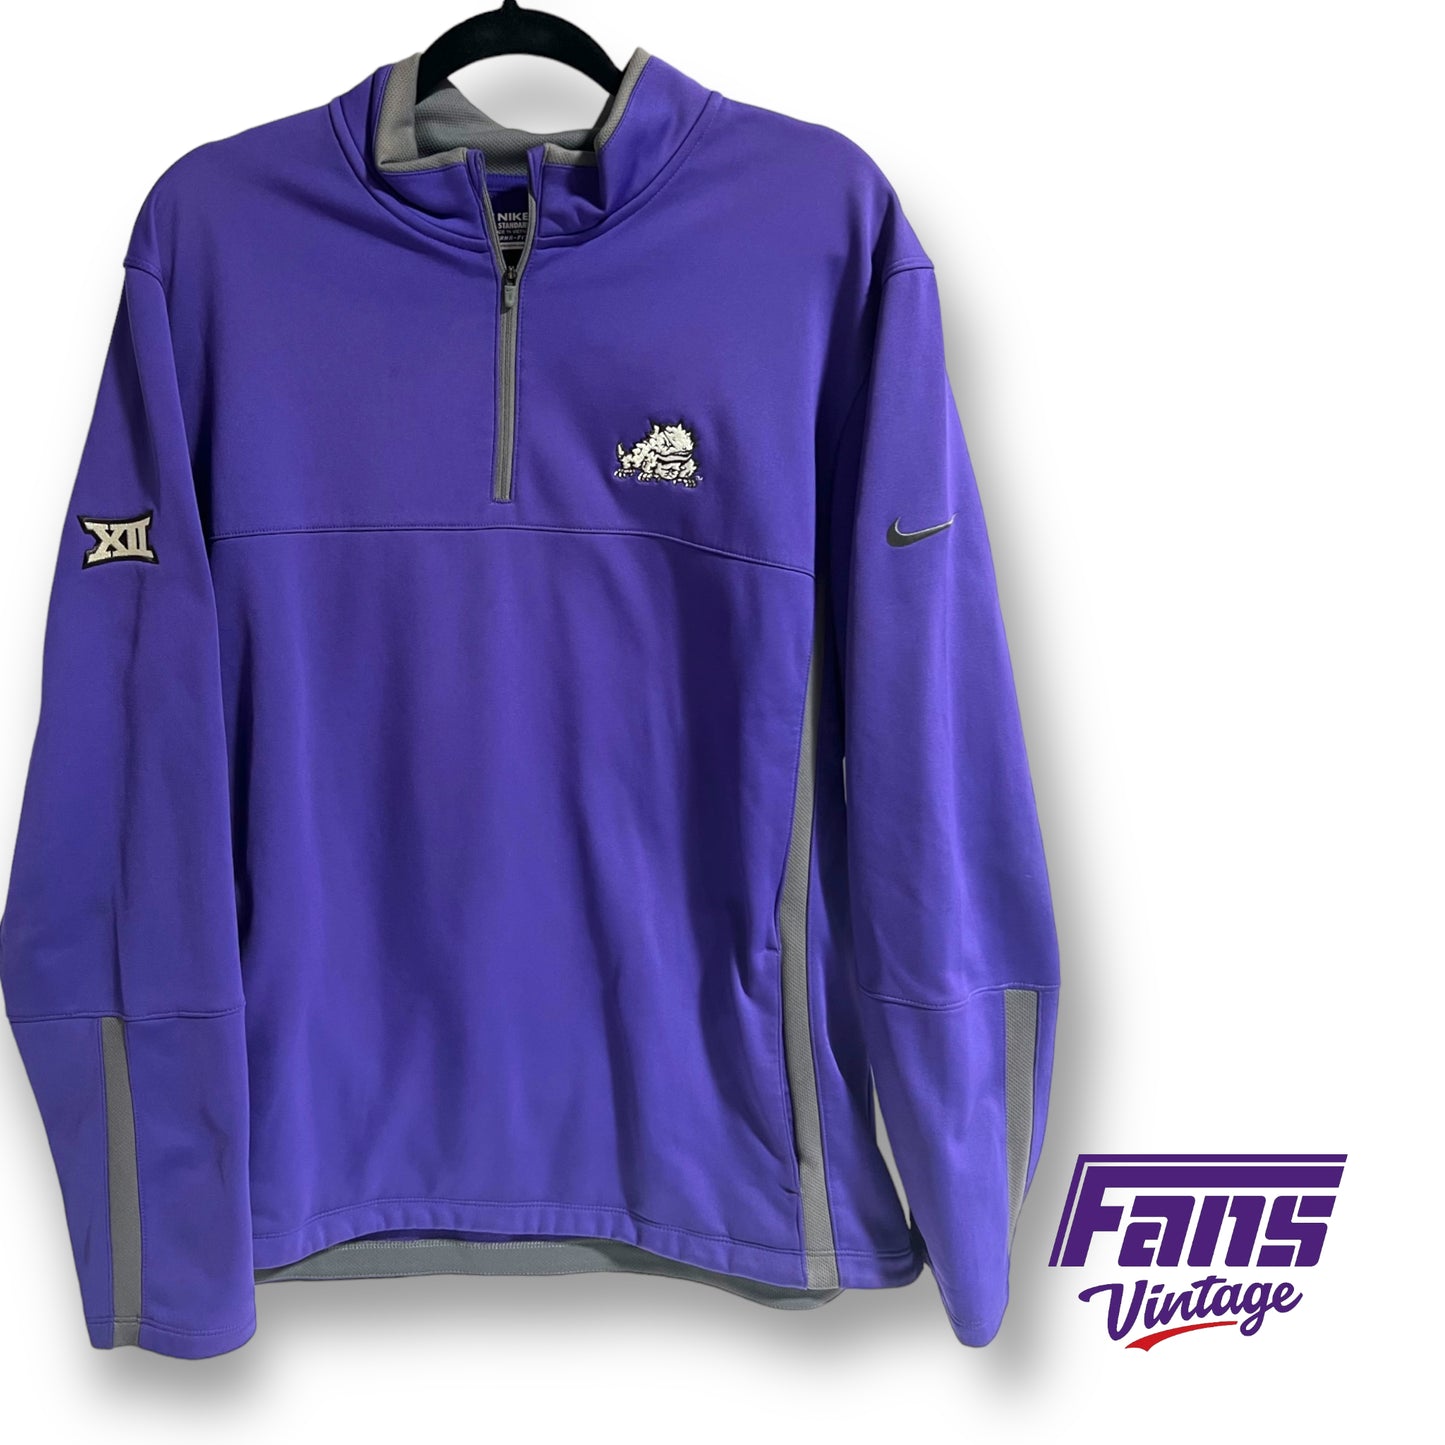 Nike Golf TCU team issued therma-fit pullover